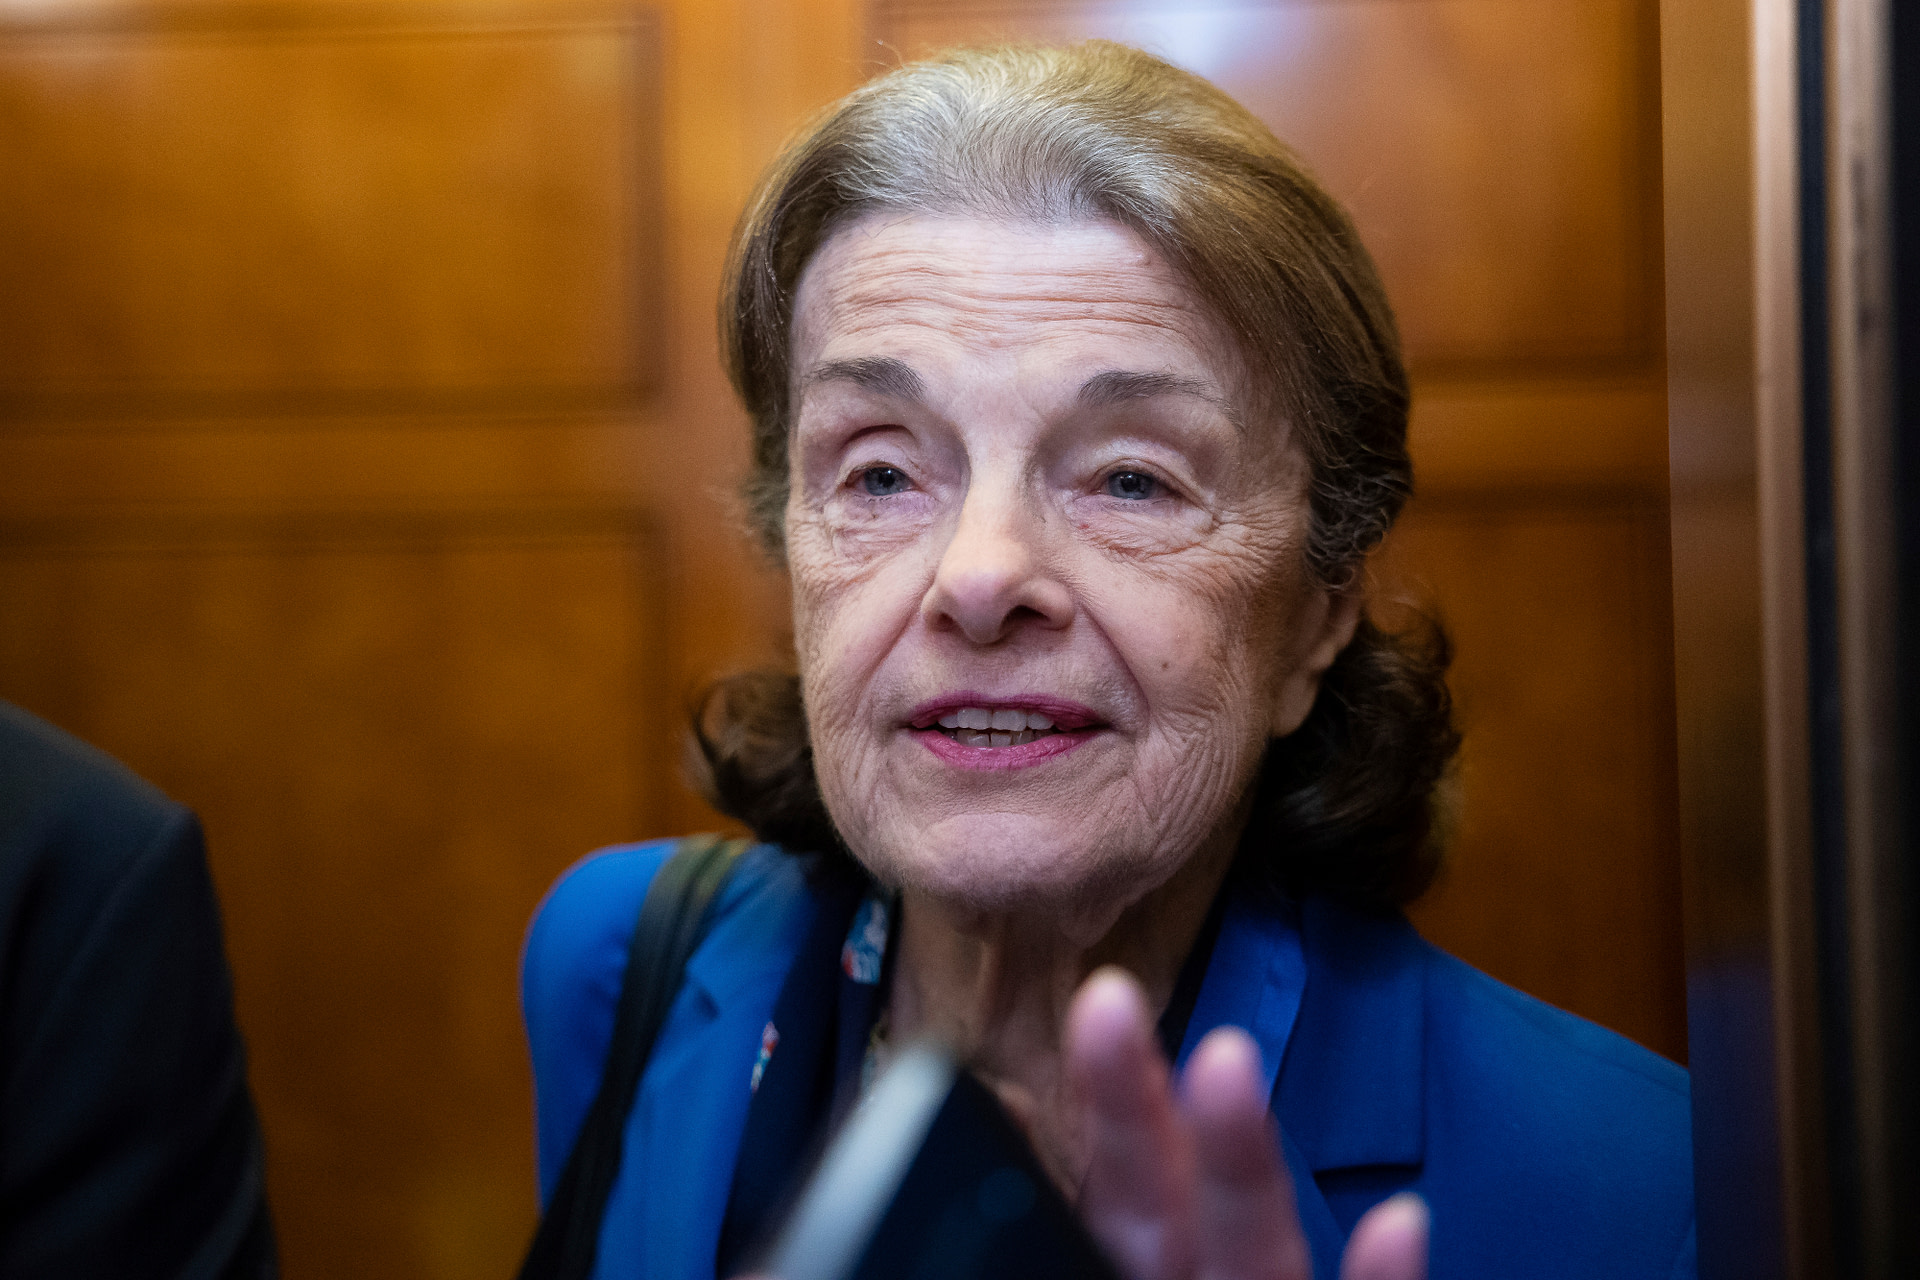 ‘You Can’t Hide Things’: Feinstein, Old Age and the Senate